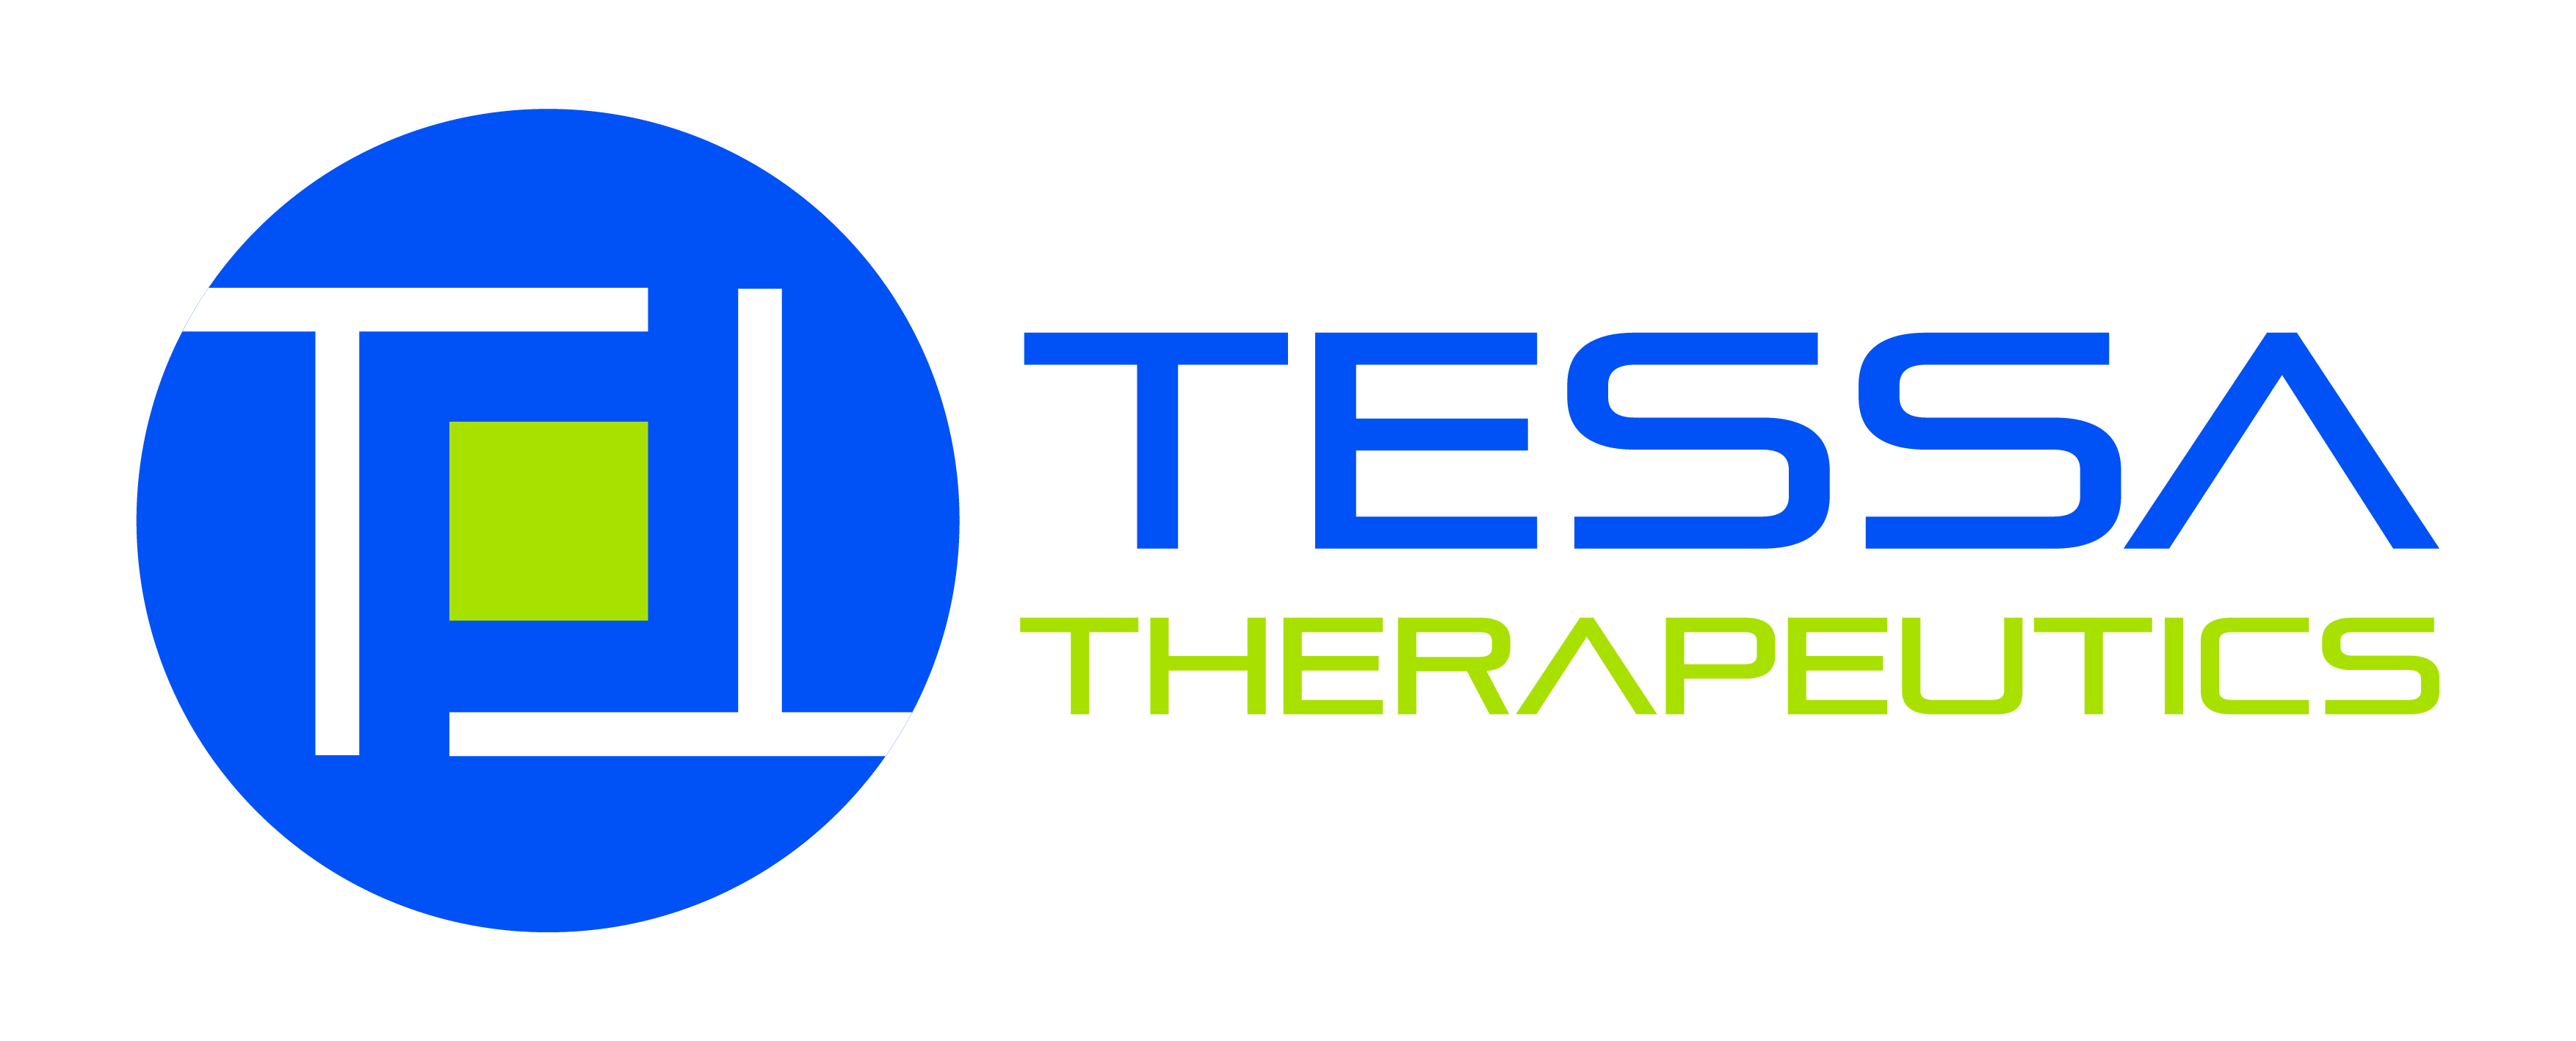 Tessa Therapeutics Announces Three Abstracts Highlighting Data from Autologous and Allogeneic Cell Therapy Programs Accepted for Presentation at 64th ASH Annual Meeting and Exposition